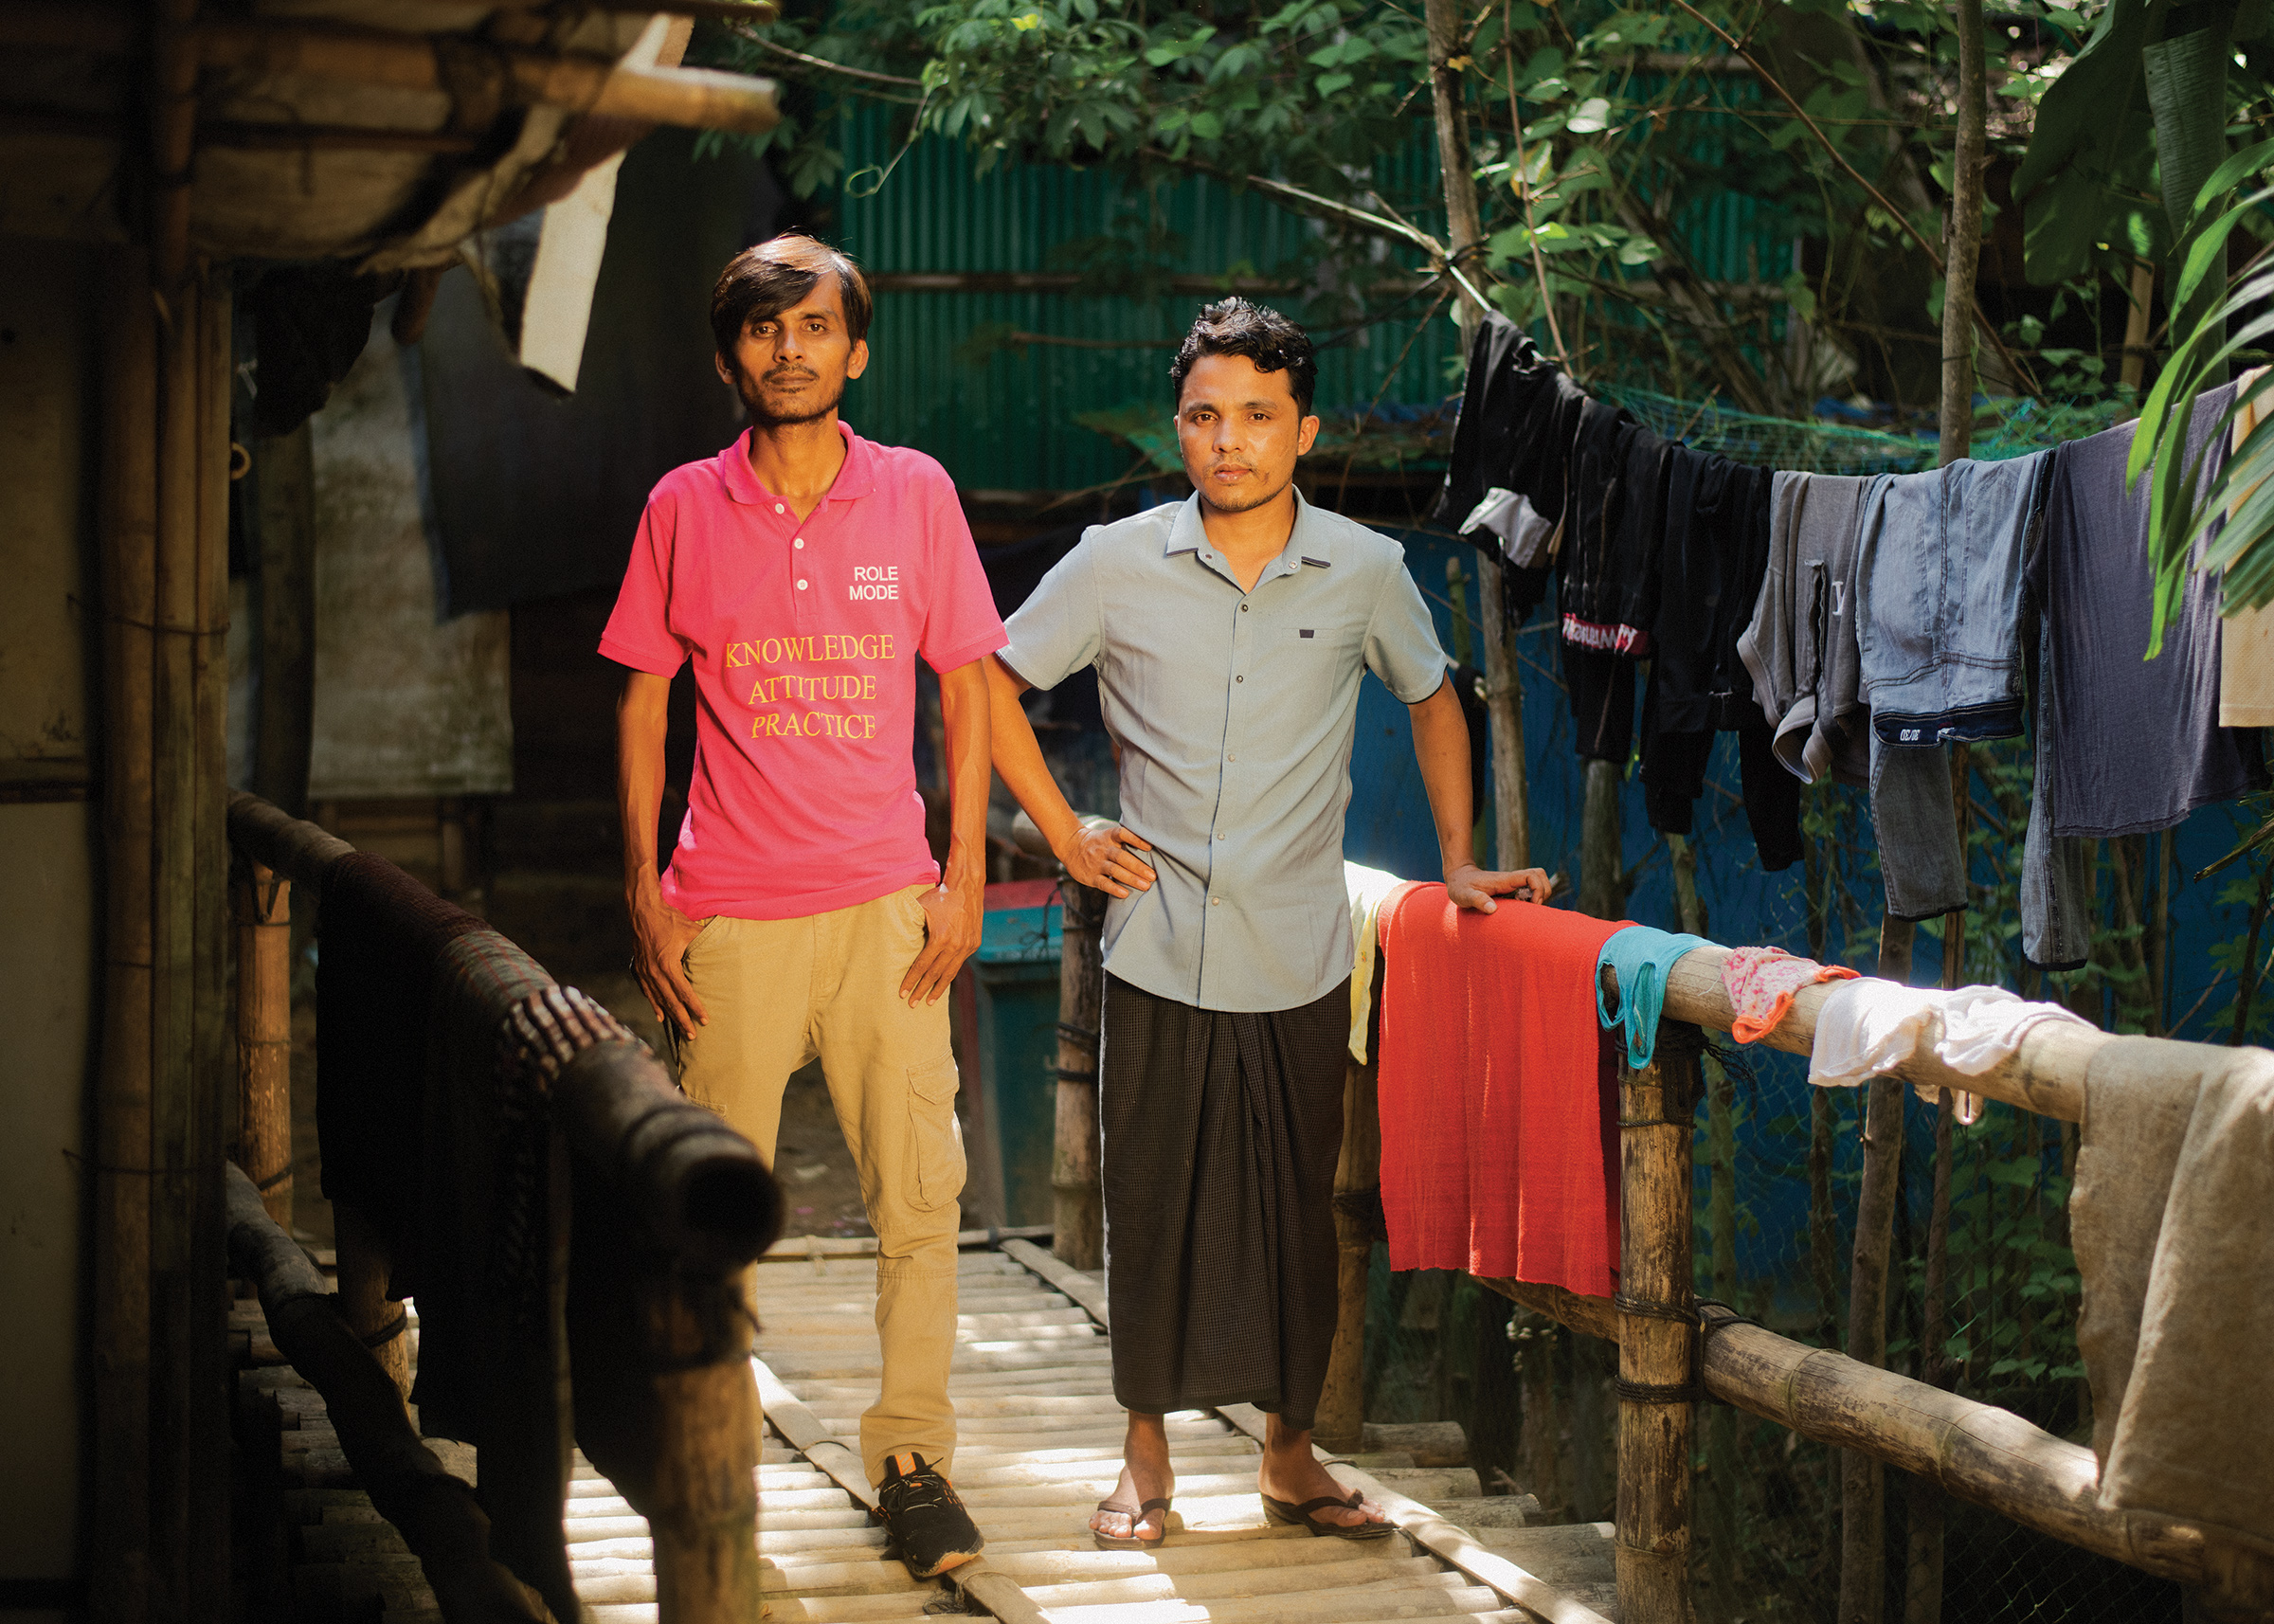 From left: Sayed Alom, 35, a community activist working in Kutupalong; with Anuwar Shah, 25, a teacher in the camp whose younger brother, Nur Komal, was arrested inside Myanmar after fleeing on a trafficker's boat. (Sarker Protick for TIME)